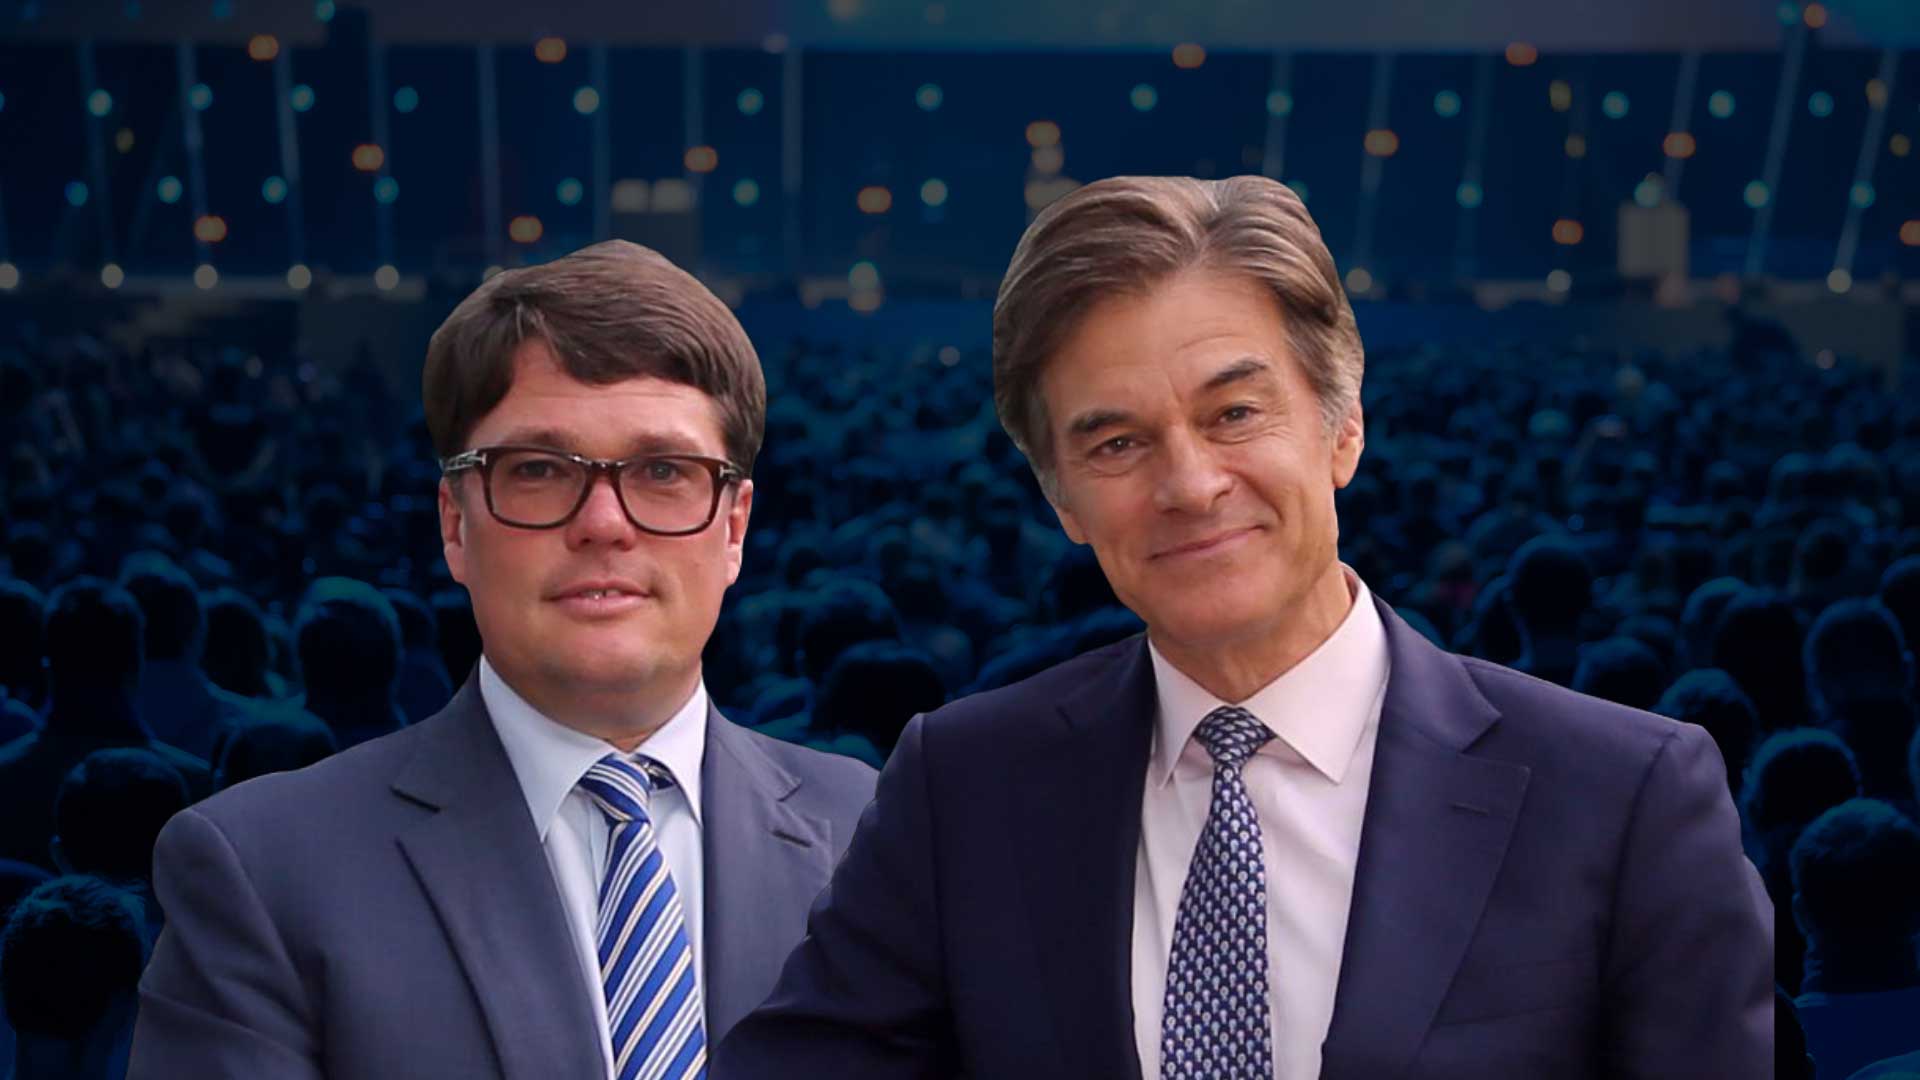 Jeff Arnold and Dr. Oz